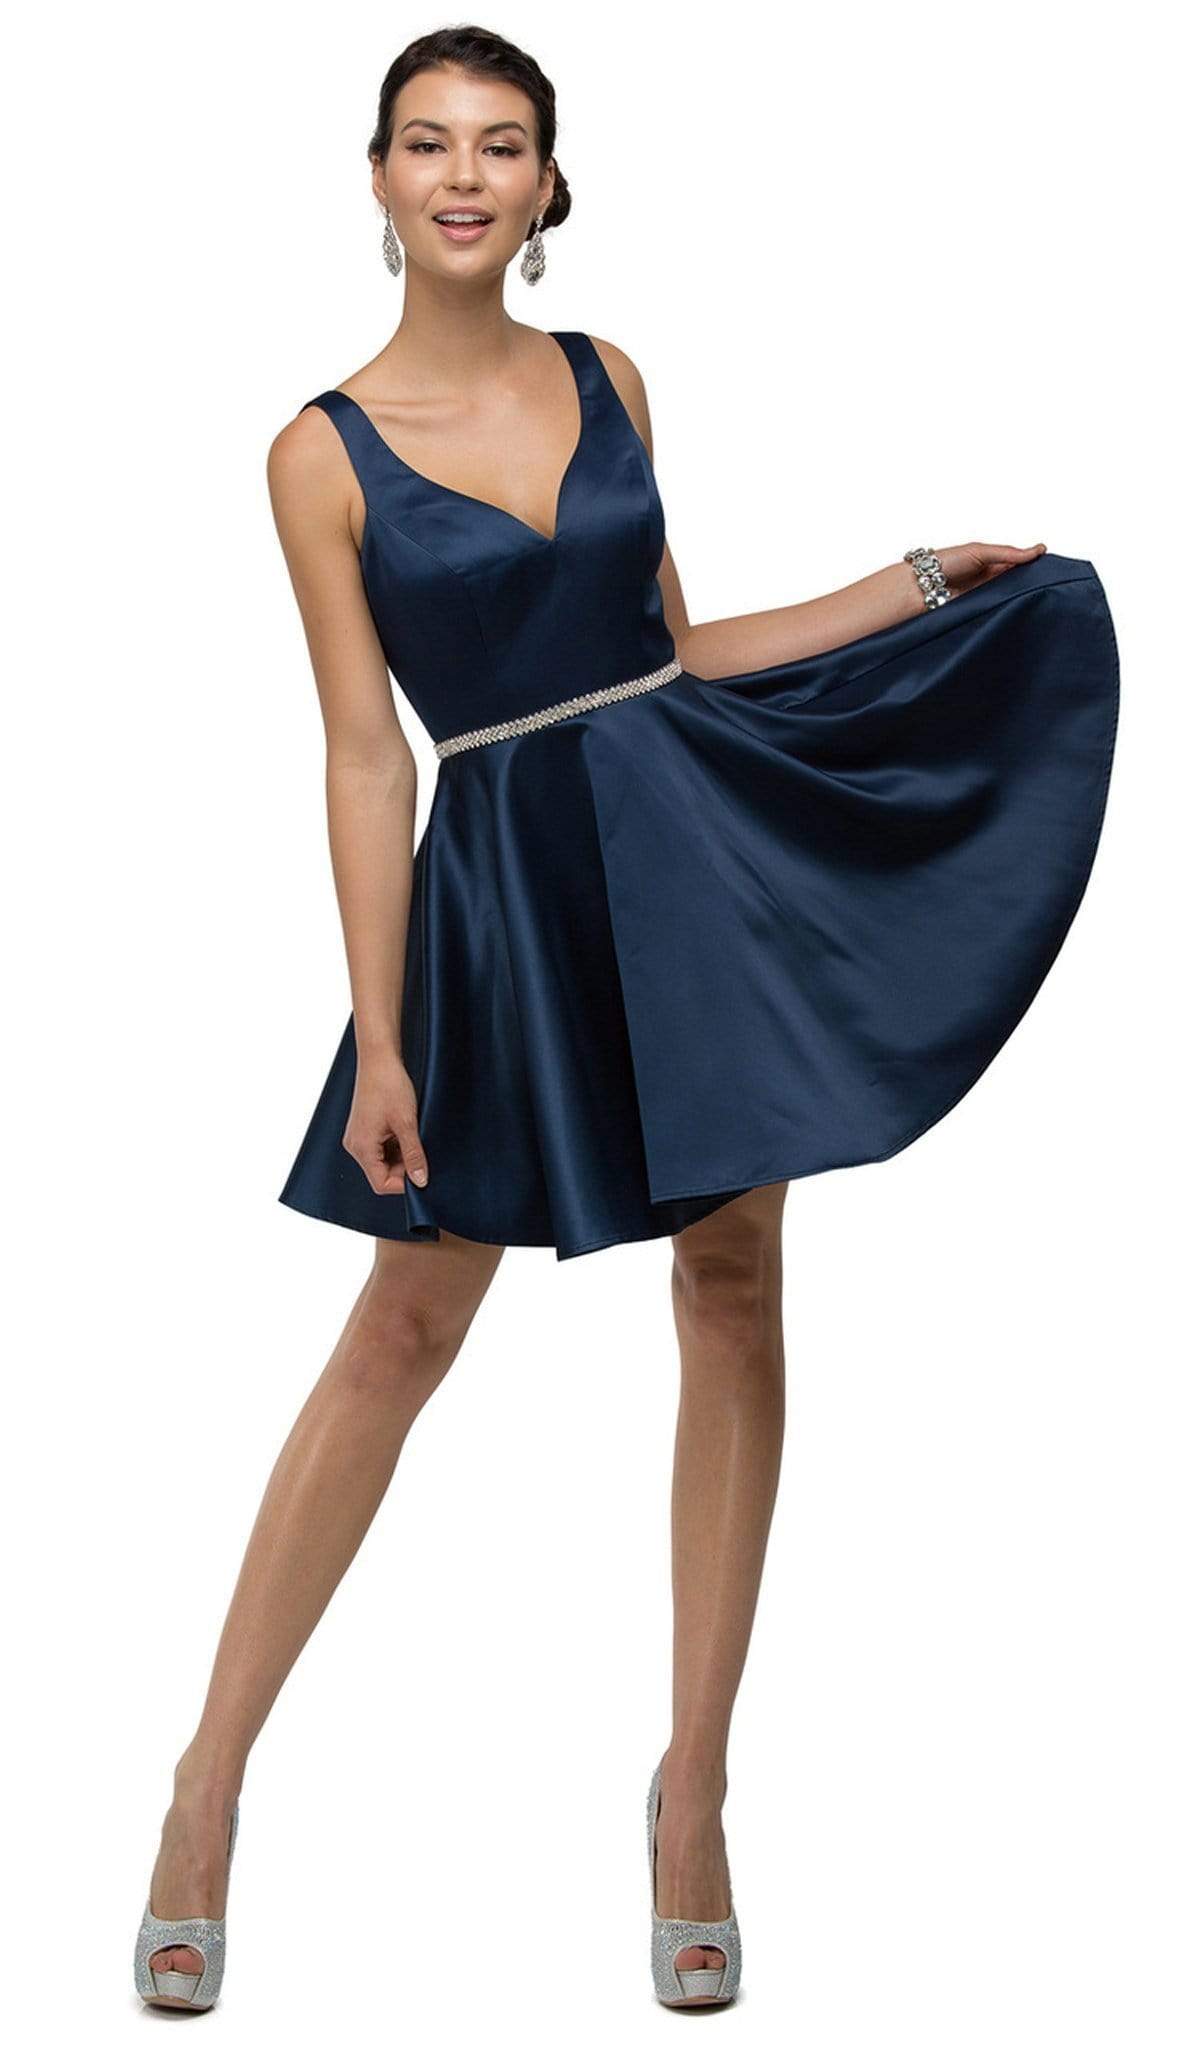 Dancing Queen - 9504 Sleeveless Sweetheart Satin Bejeweled Cocktail Dress Cocktail Dresses XS / Navy